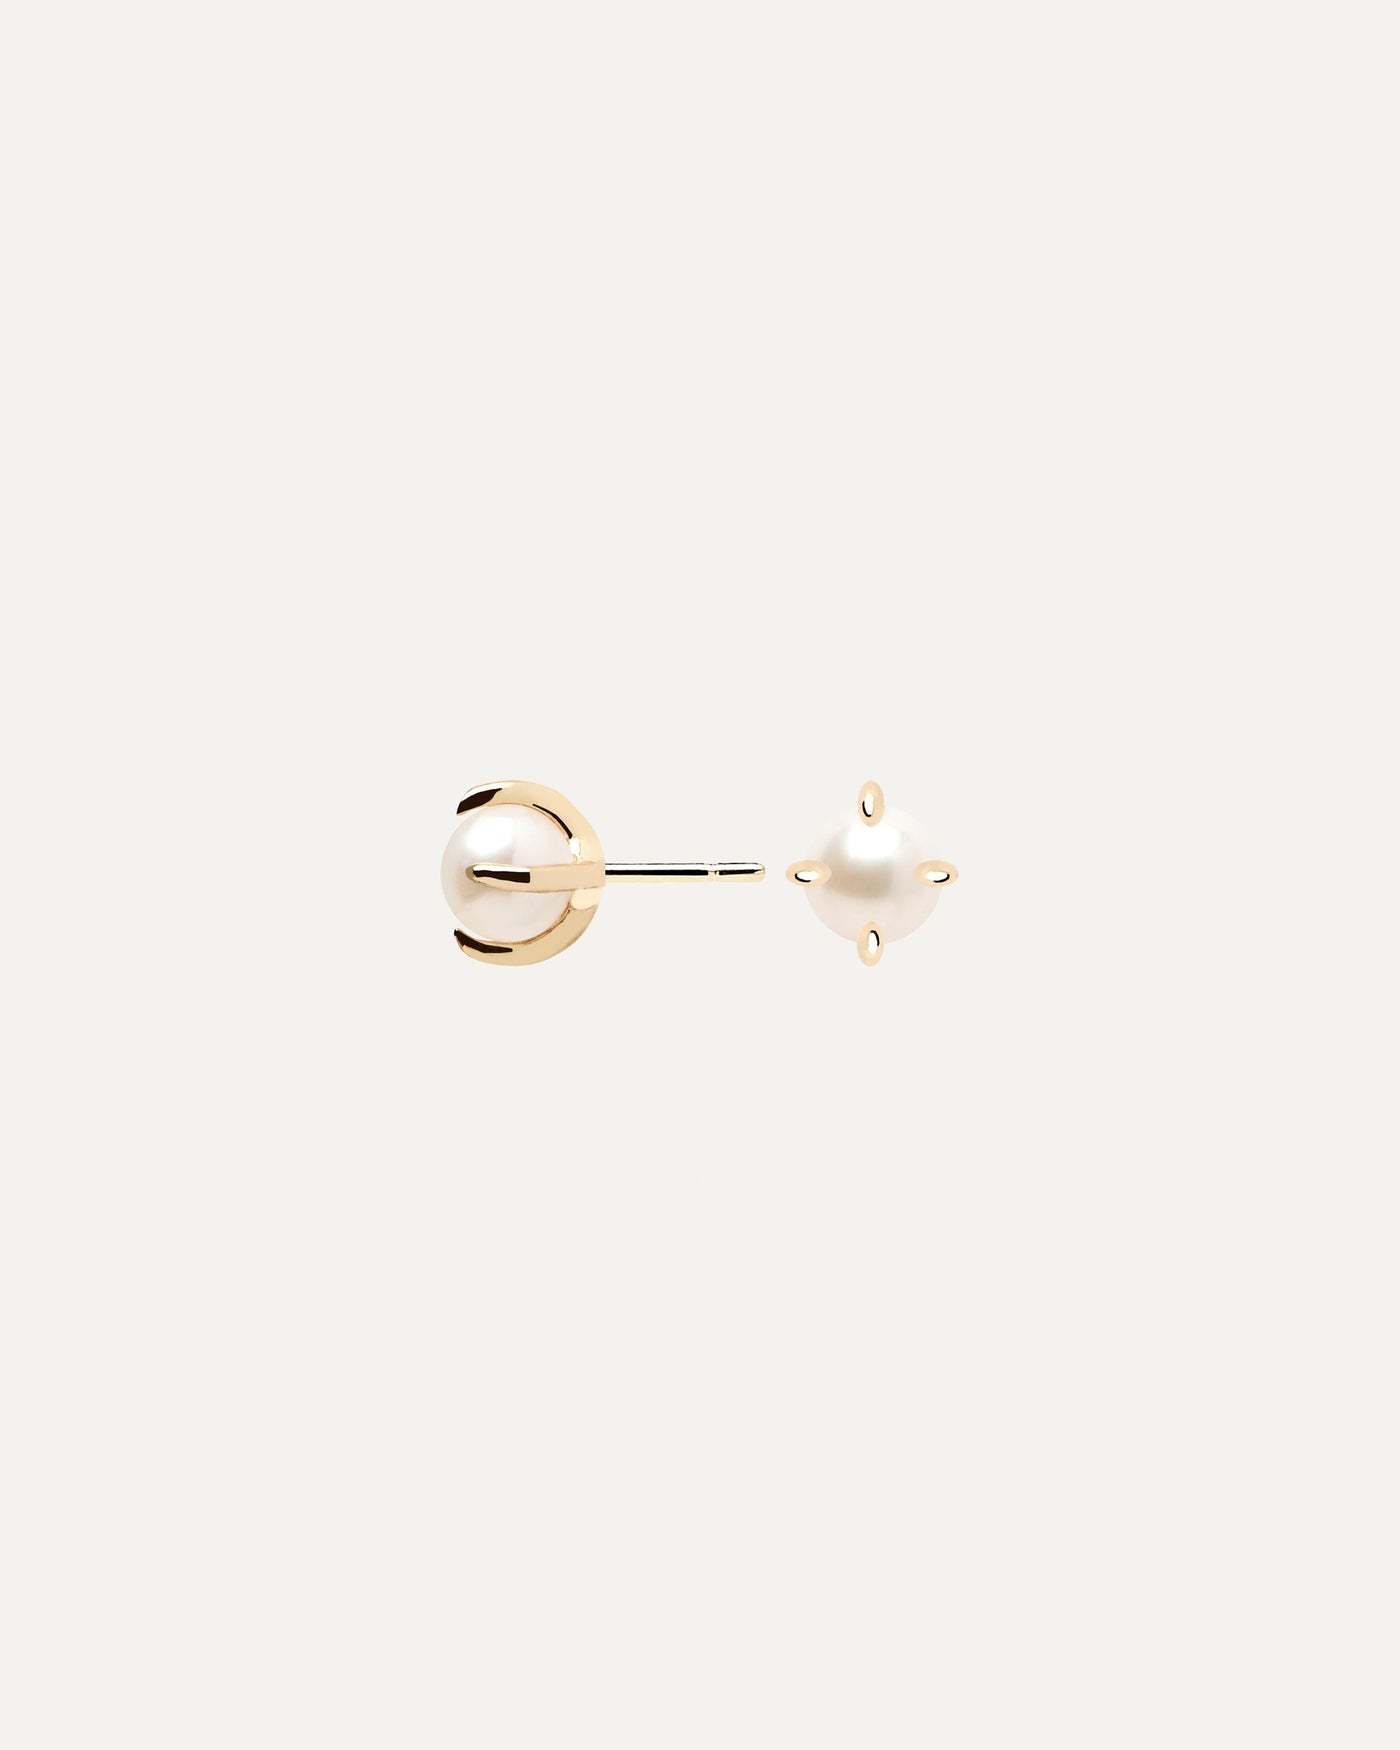 2023 Selection | Solitary Pearl Earrings. Pair of 18k gold plated single natural pearl studs set on prongs. Get the latest arrival from PDPAOLA. Place your order safely and get this Best Seller. Free Shipping.